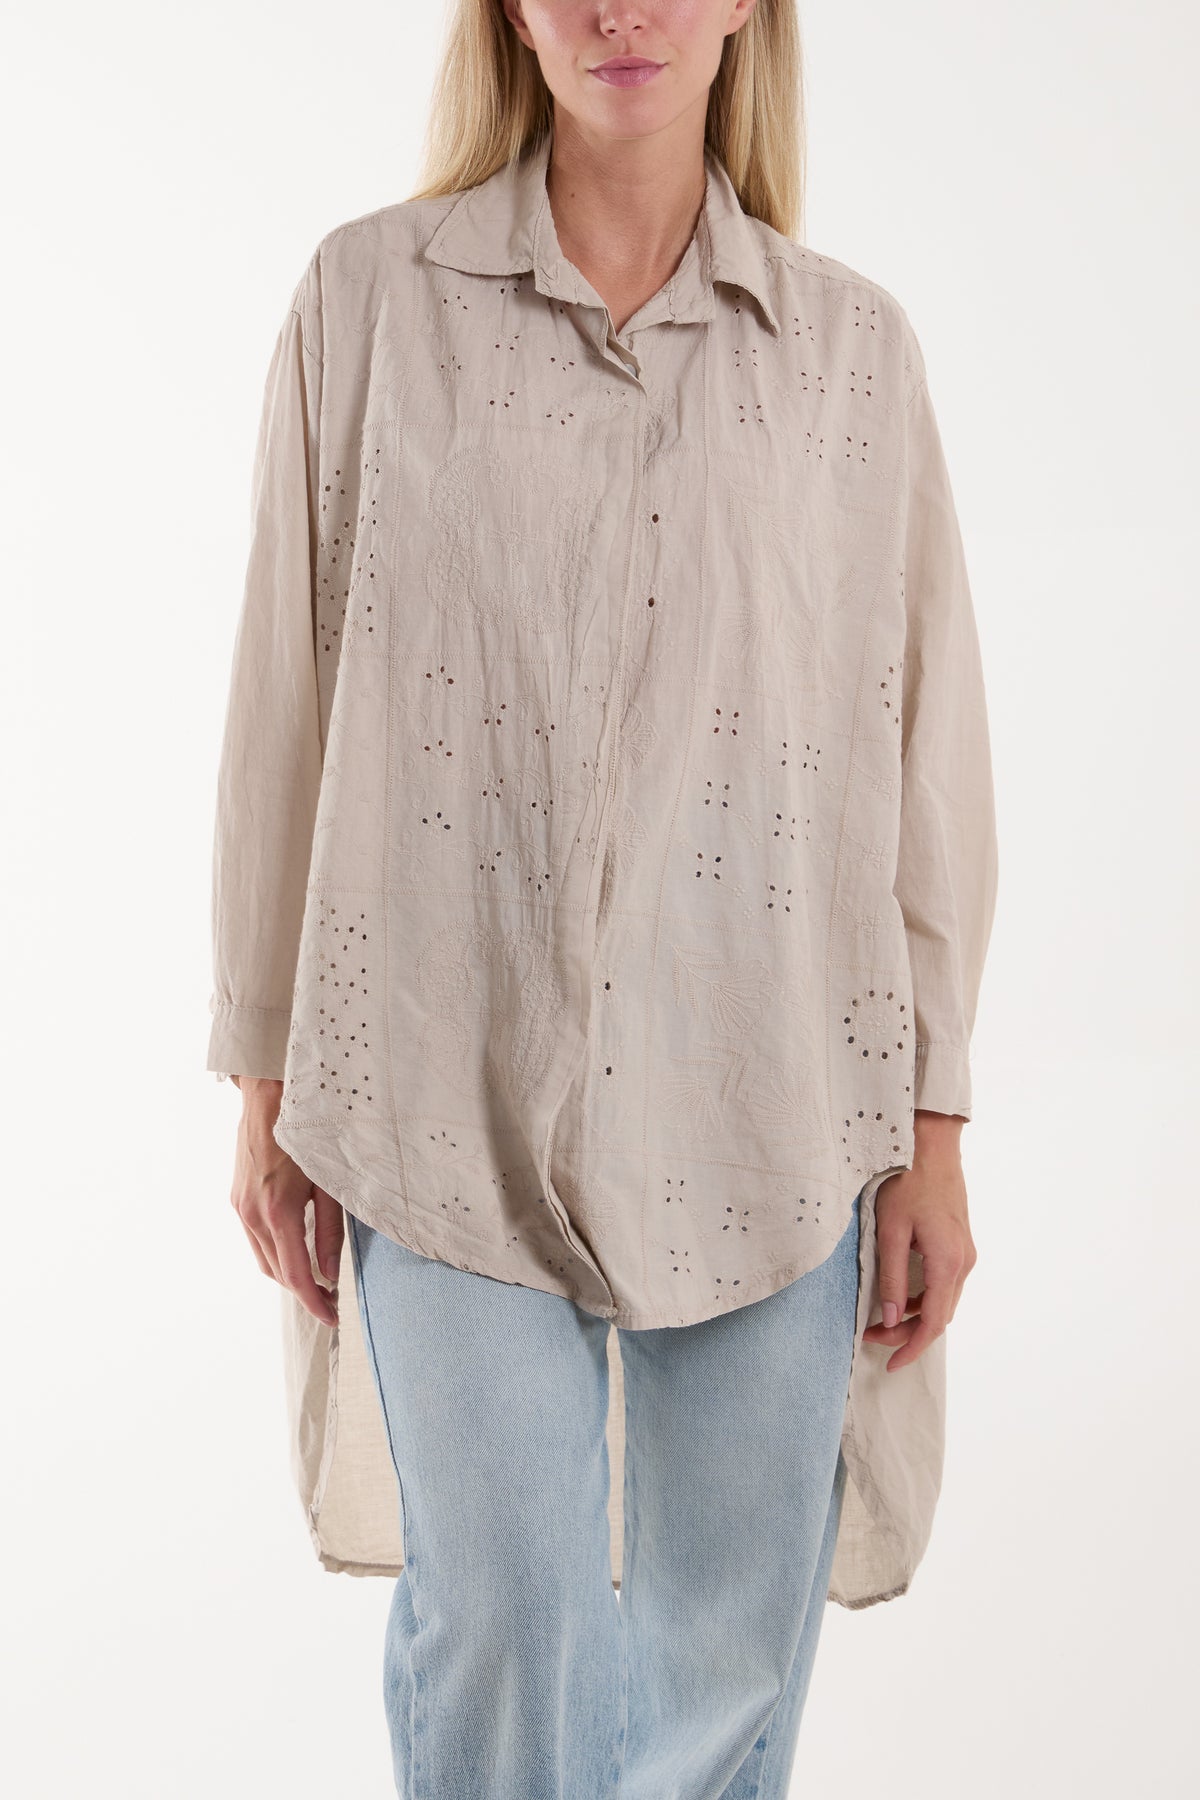 Tile Pattern Broderie Anglaise Shirt